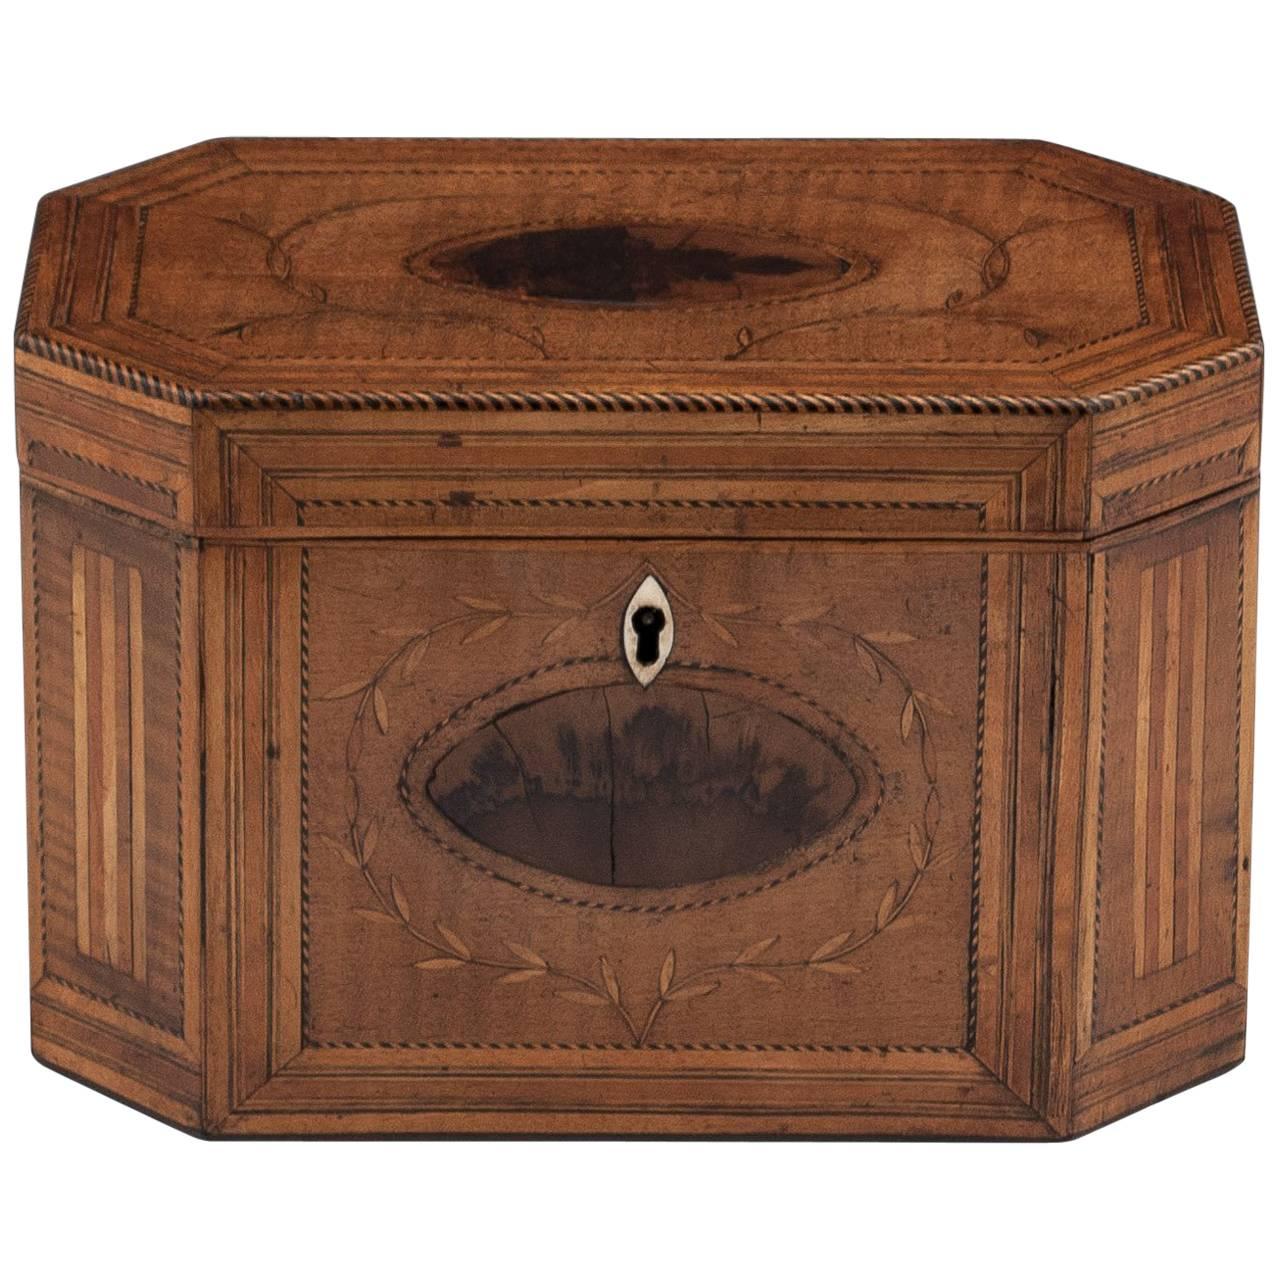 Antique Georgian Harewood Tea Caddy with Blackthorn Oysters, 18th Century